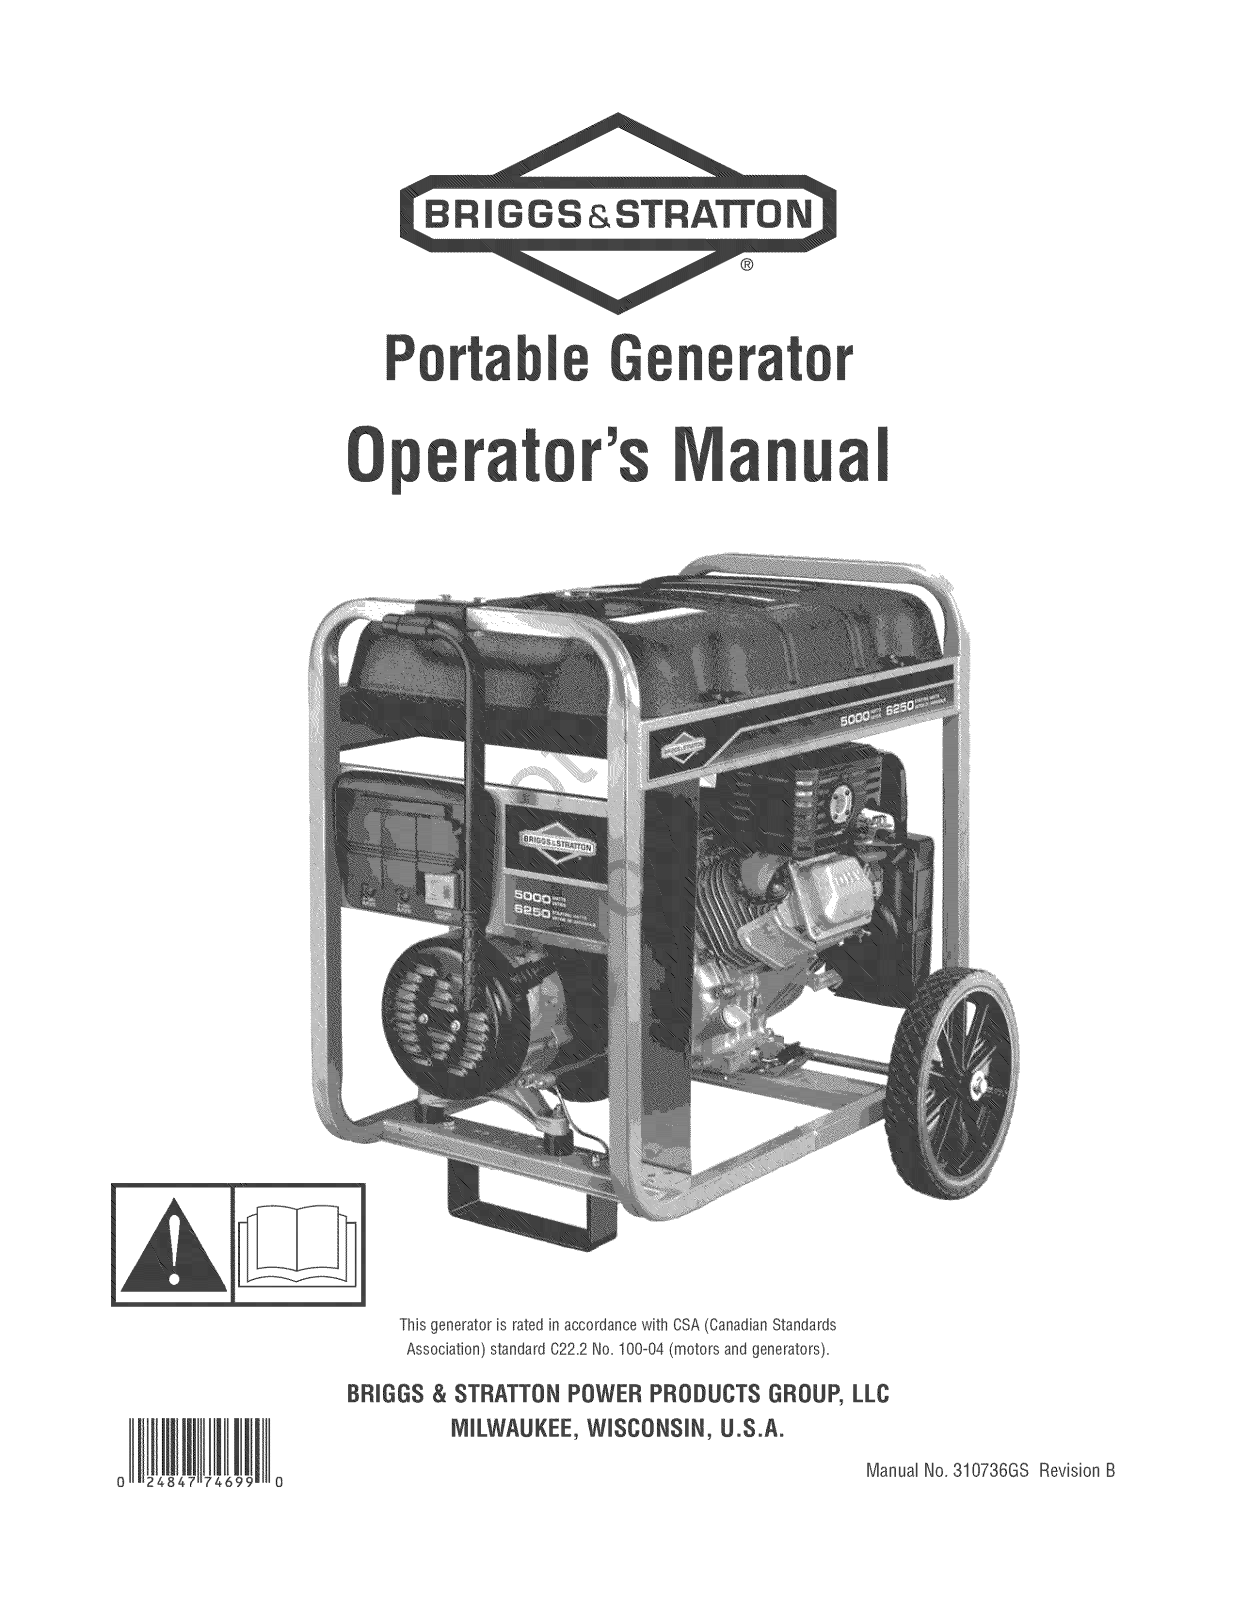 Briggs & Stratton 030422-1, 030422-0 Owner’s Manual